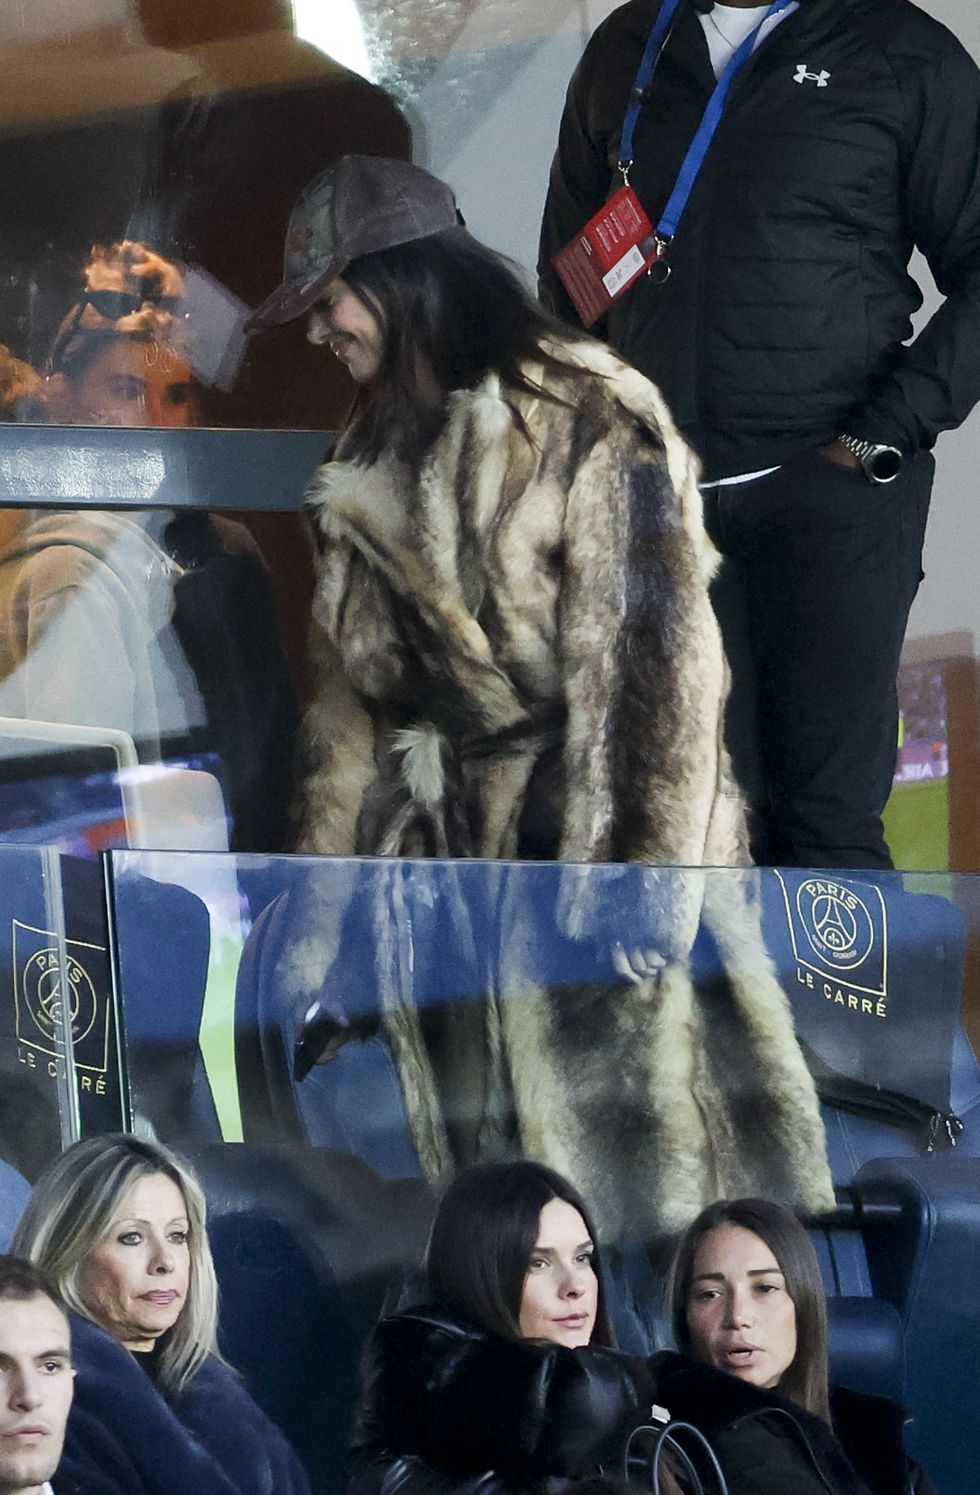 paris, france march 19 kendall jenner attends the ligue 1 uber eats match between paris saint germain psg and stade rennais rennes at parc des princes stadium on march 19, 2023 in paris, france photo by jean catuffegetty images